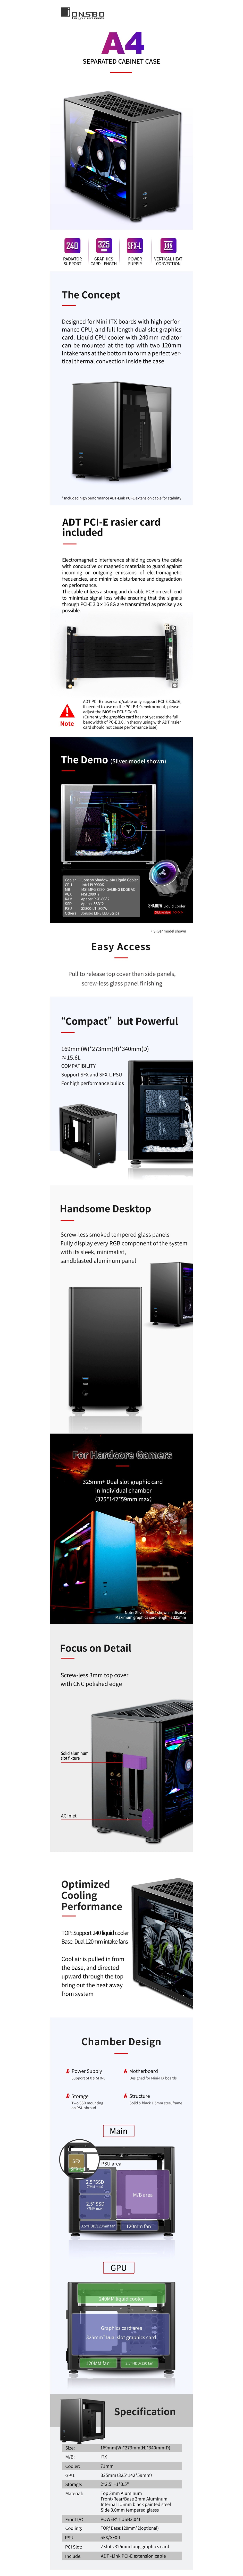 A large marketing image providing additional information about the product Jonsbo A4 Black mITX Case w/Tempered Glass Side Panel - Additional alt info not provided